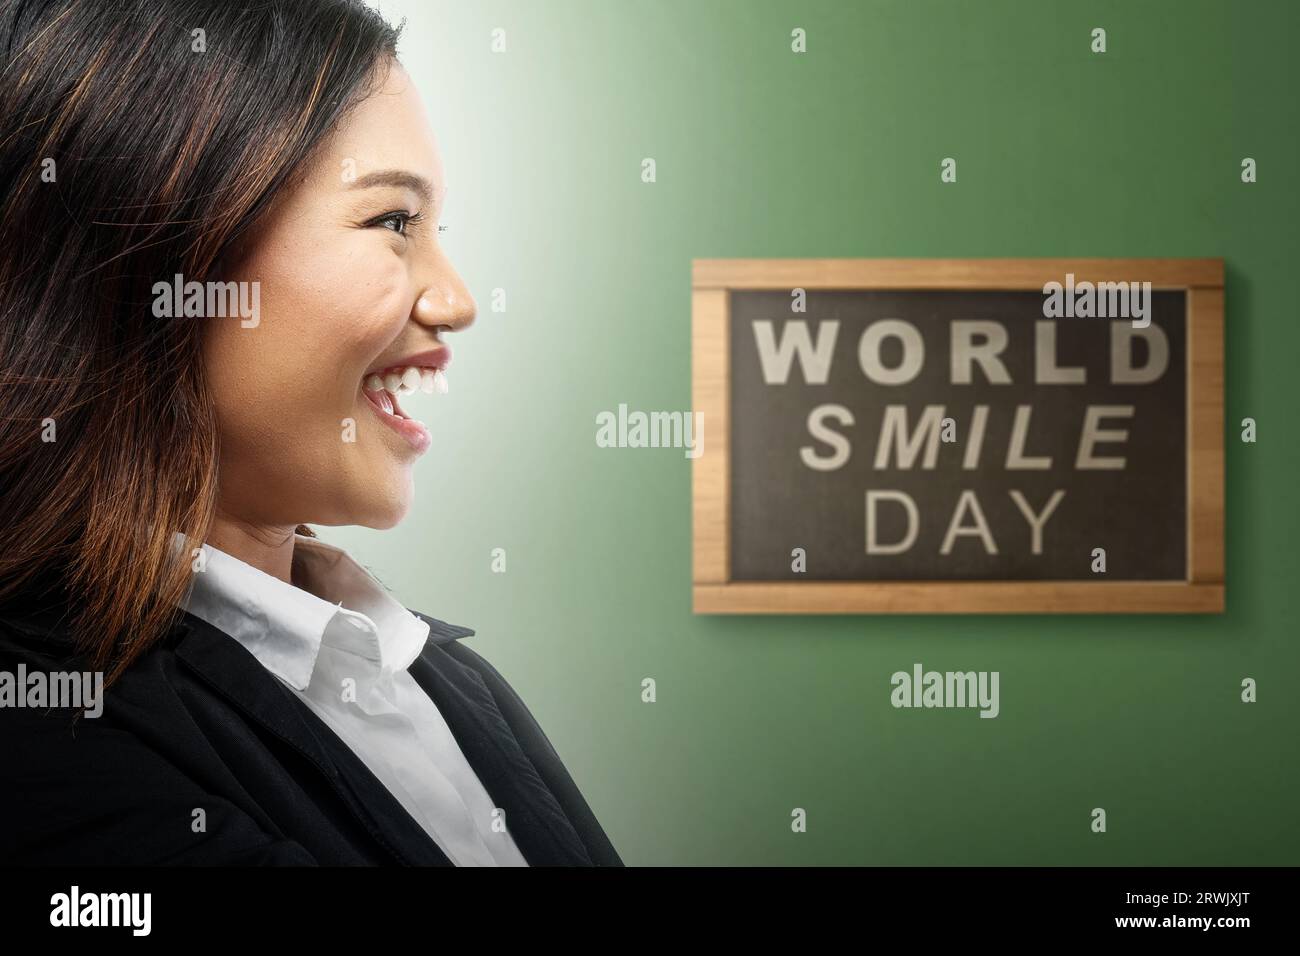 Lab Coat, Smiley Face, Globe, Handshake: Why Emojis Can Bring The